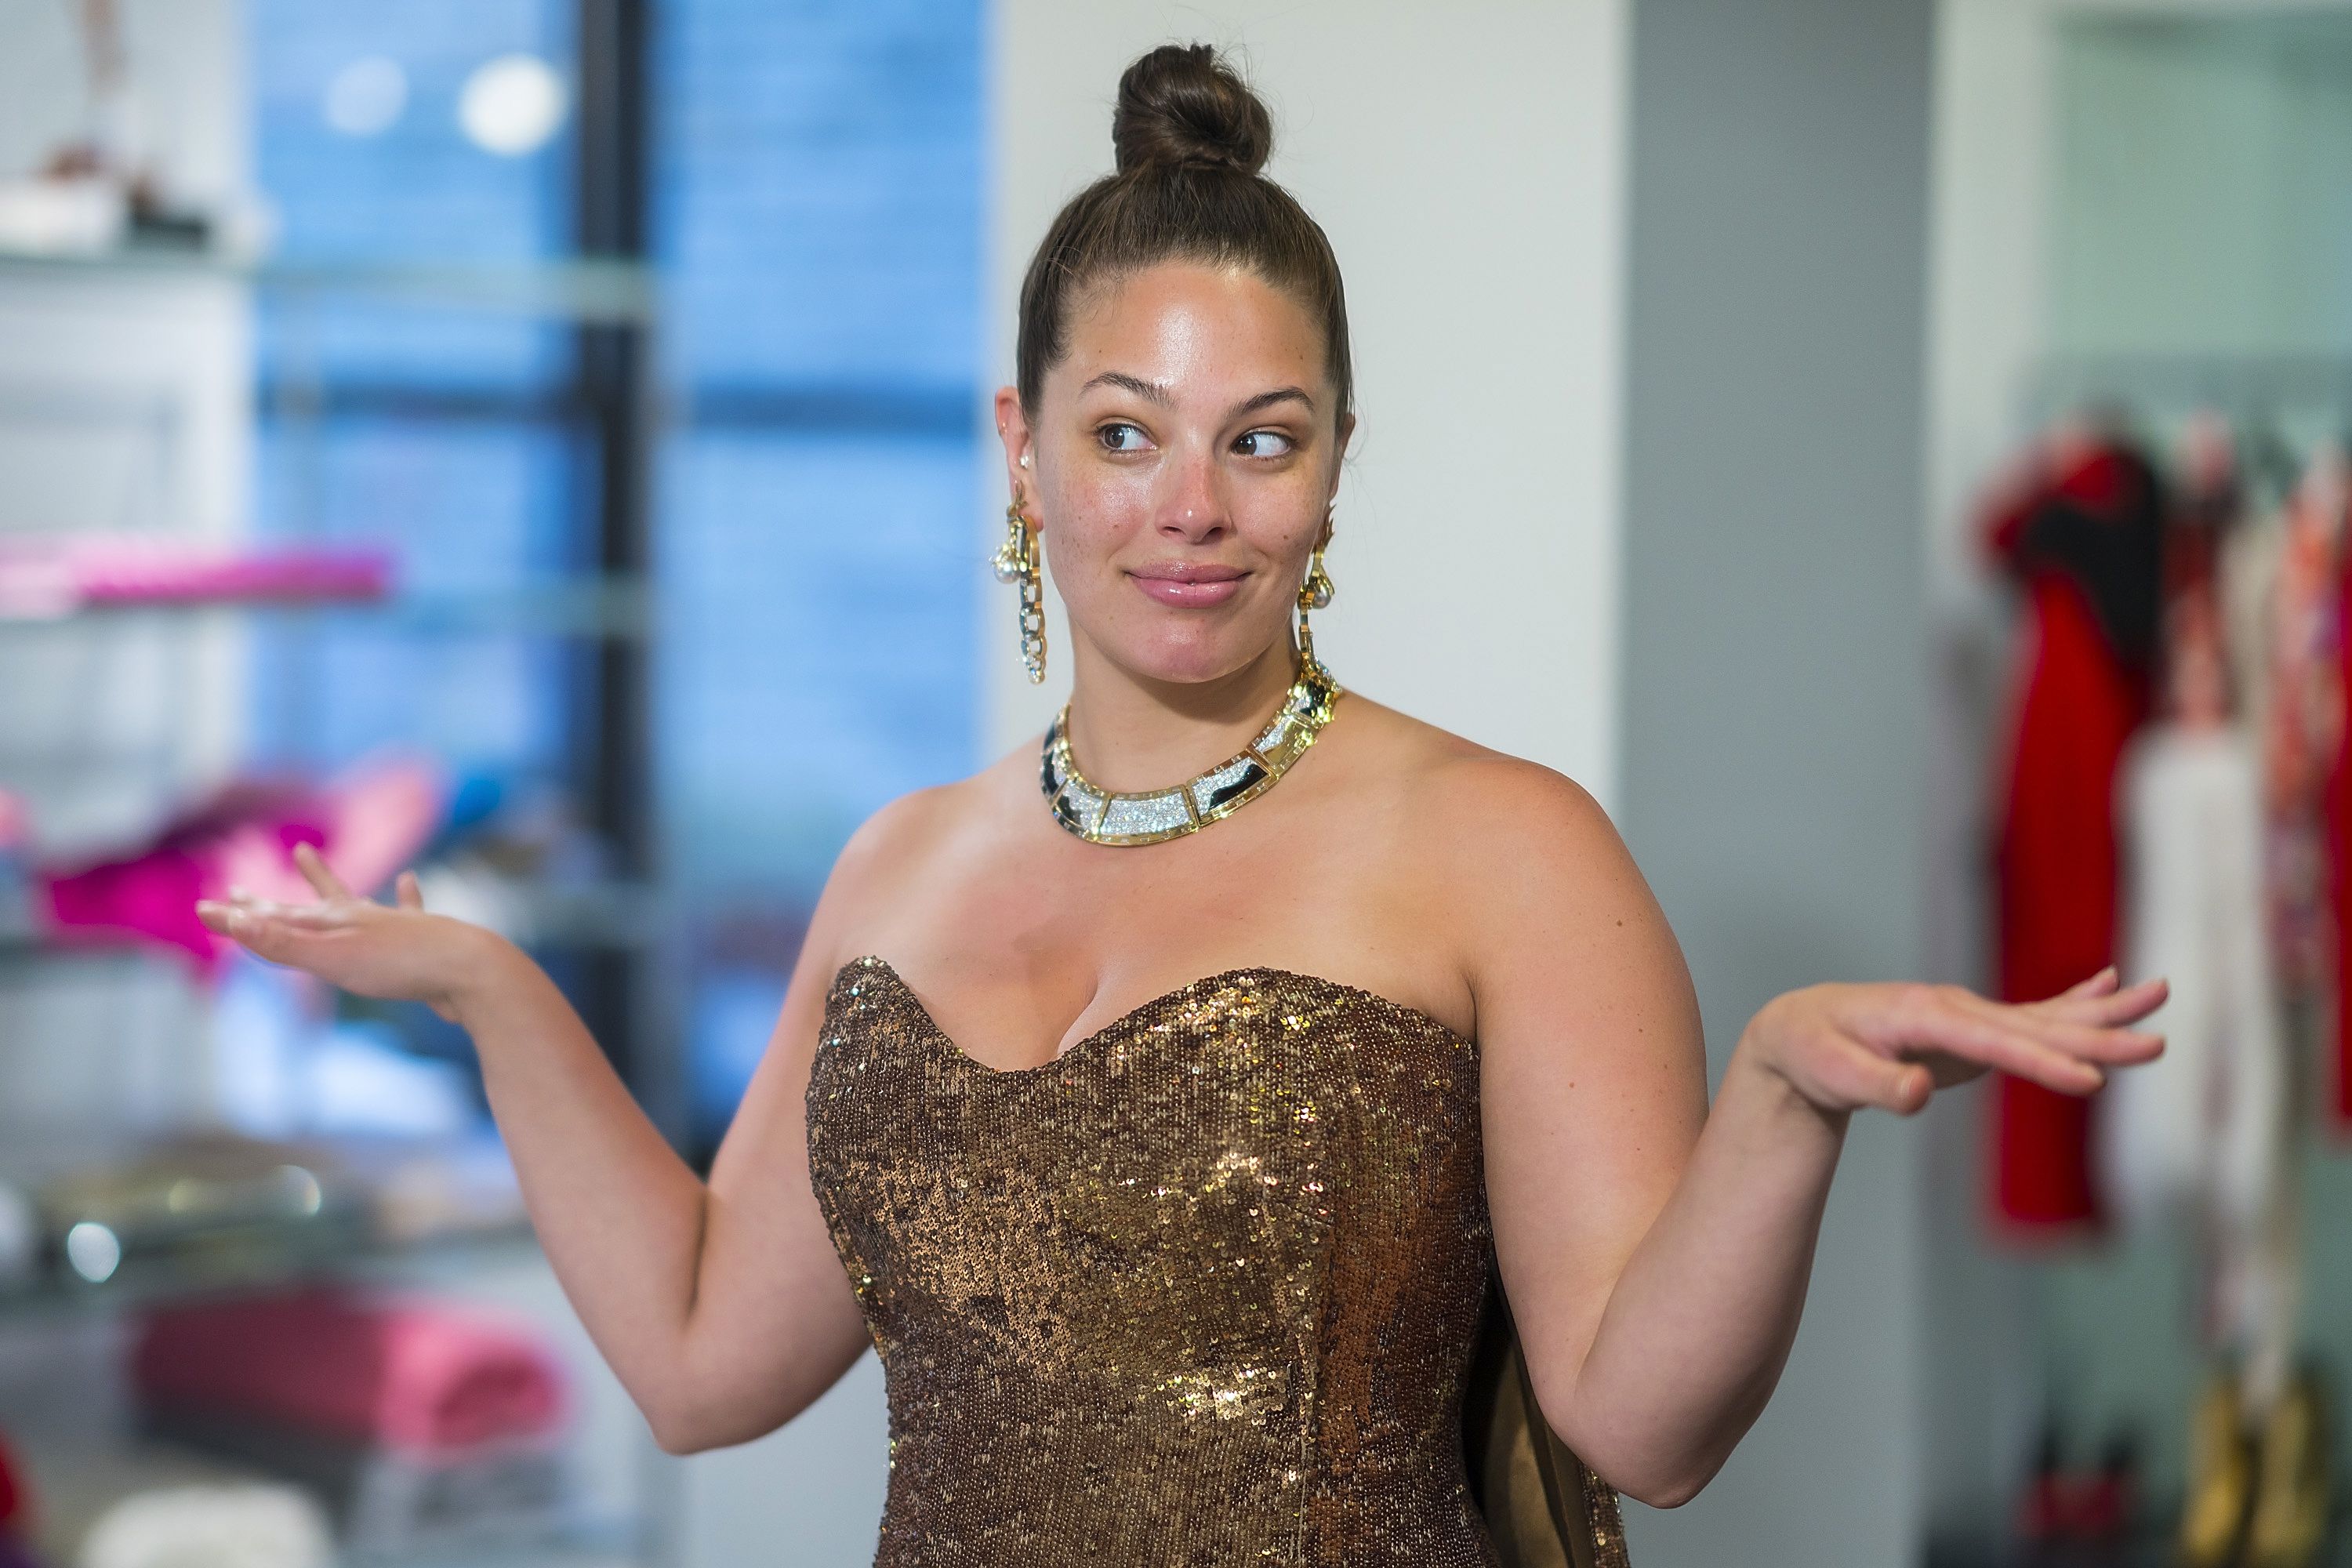 Ashley Graham Poses Completely Nude While Pregnant on Instagram